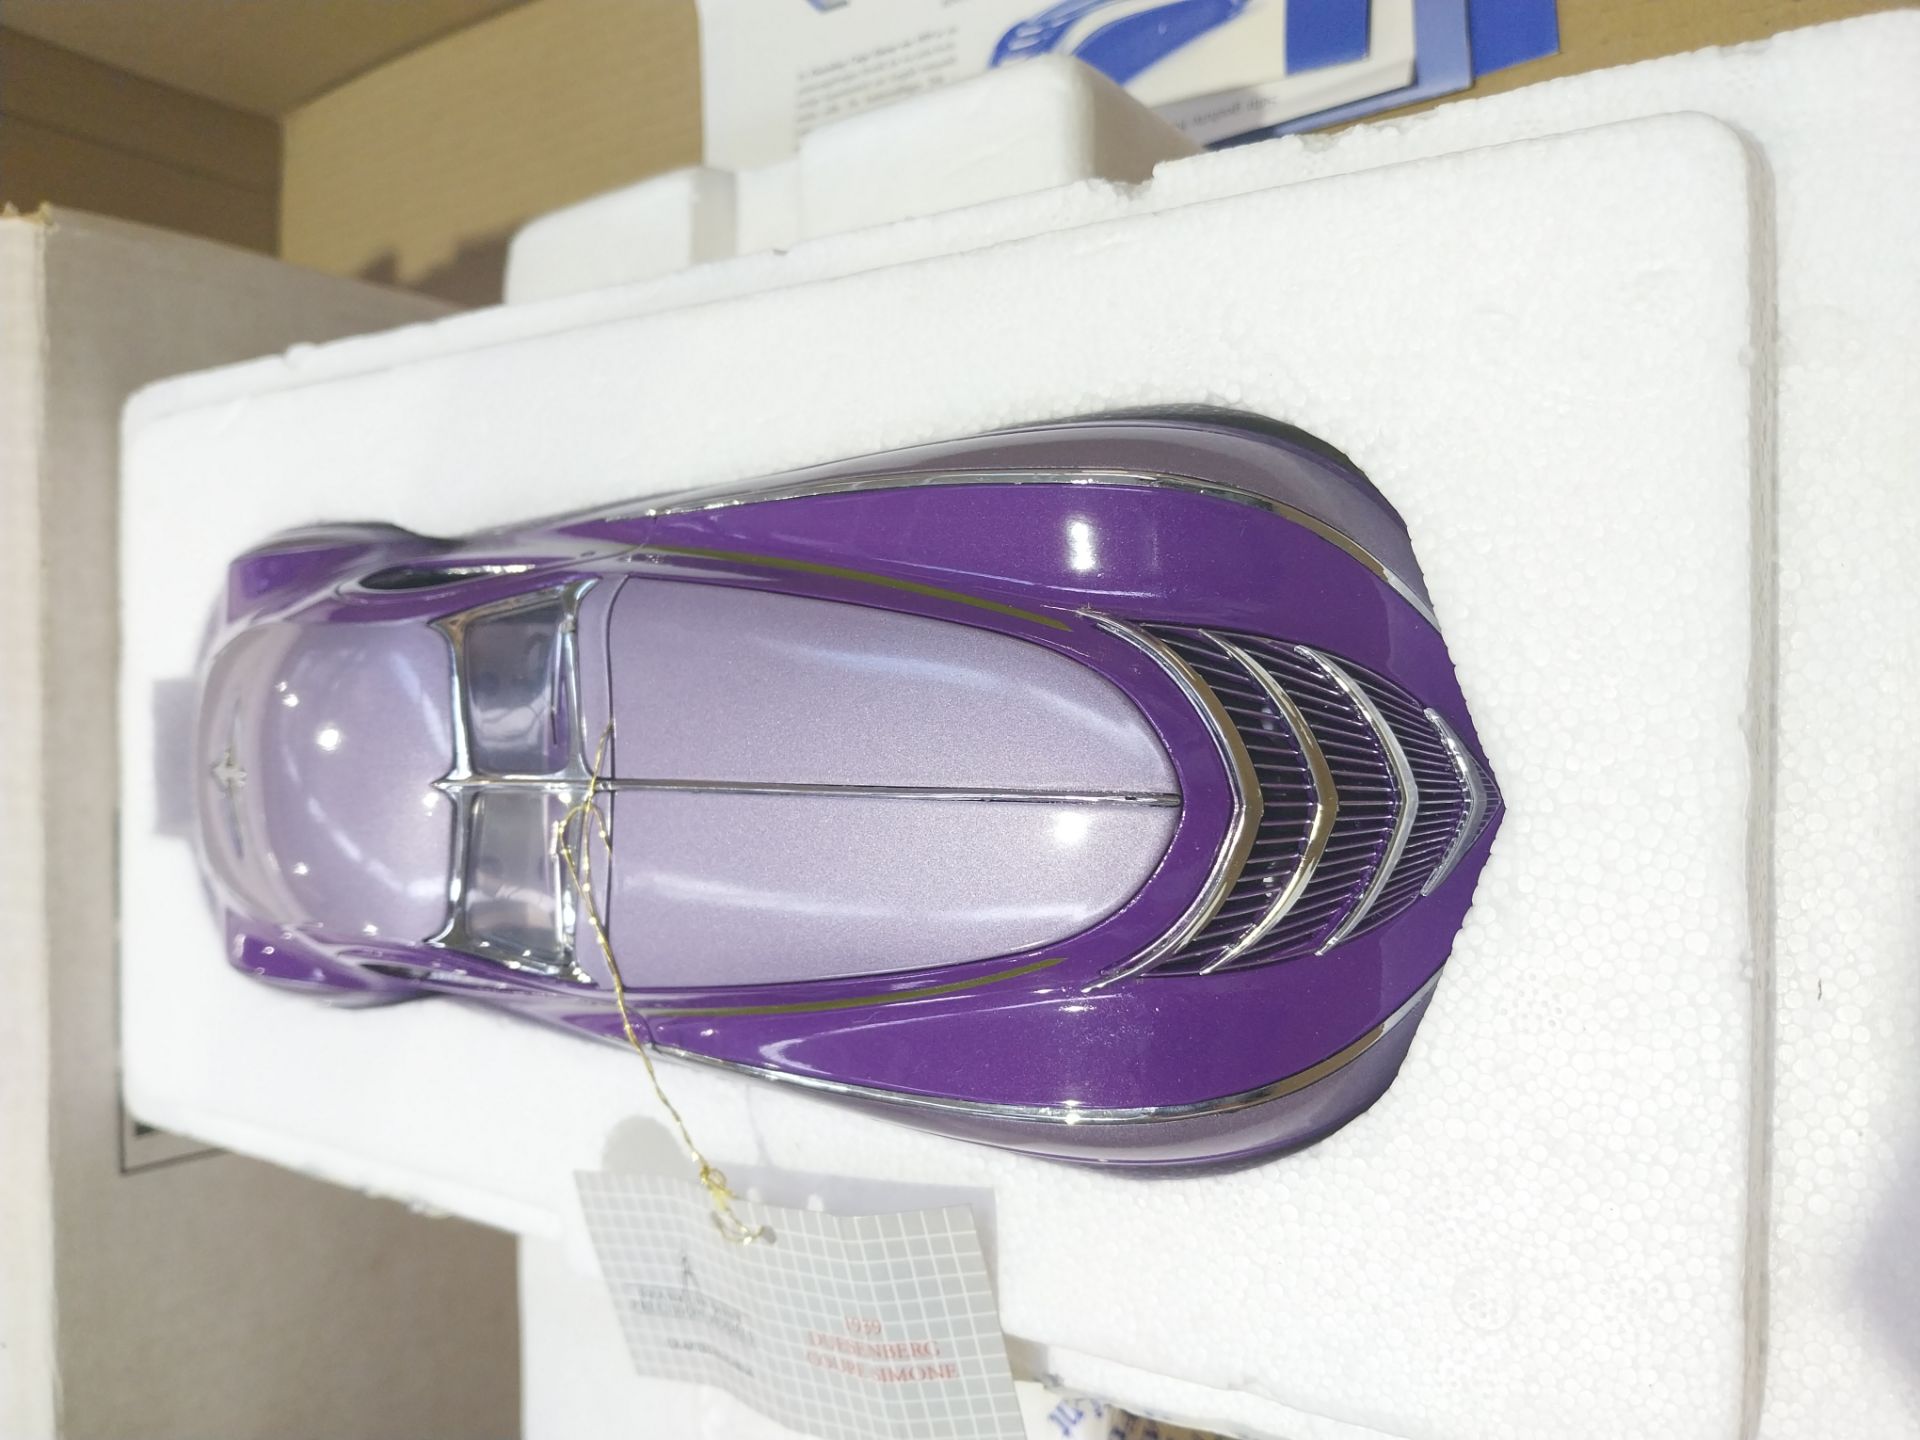 Franklin Mint, a boxed 1939 Duesenberg Coupe “Simone” - Image 3 of 4